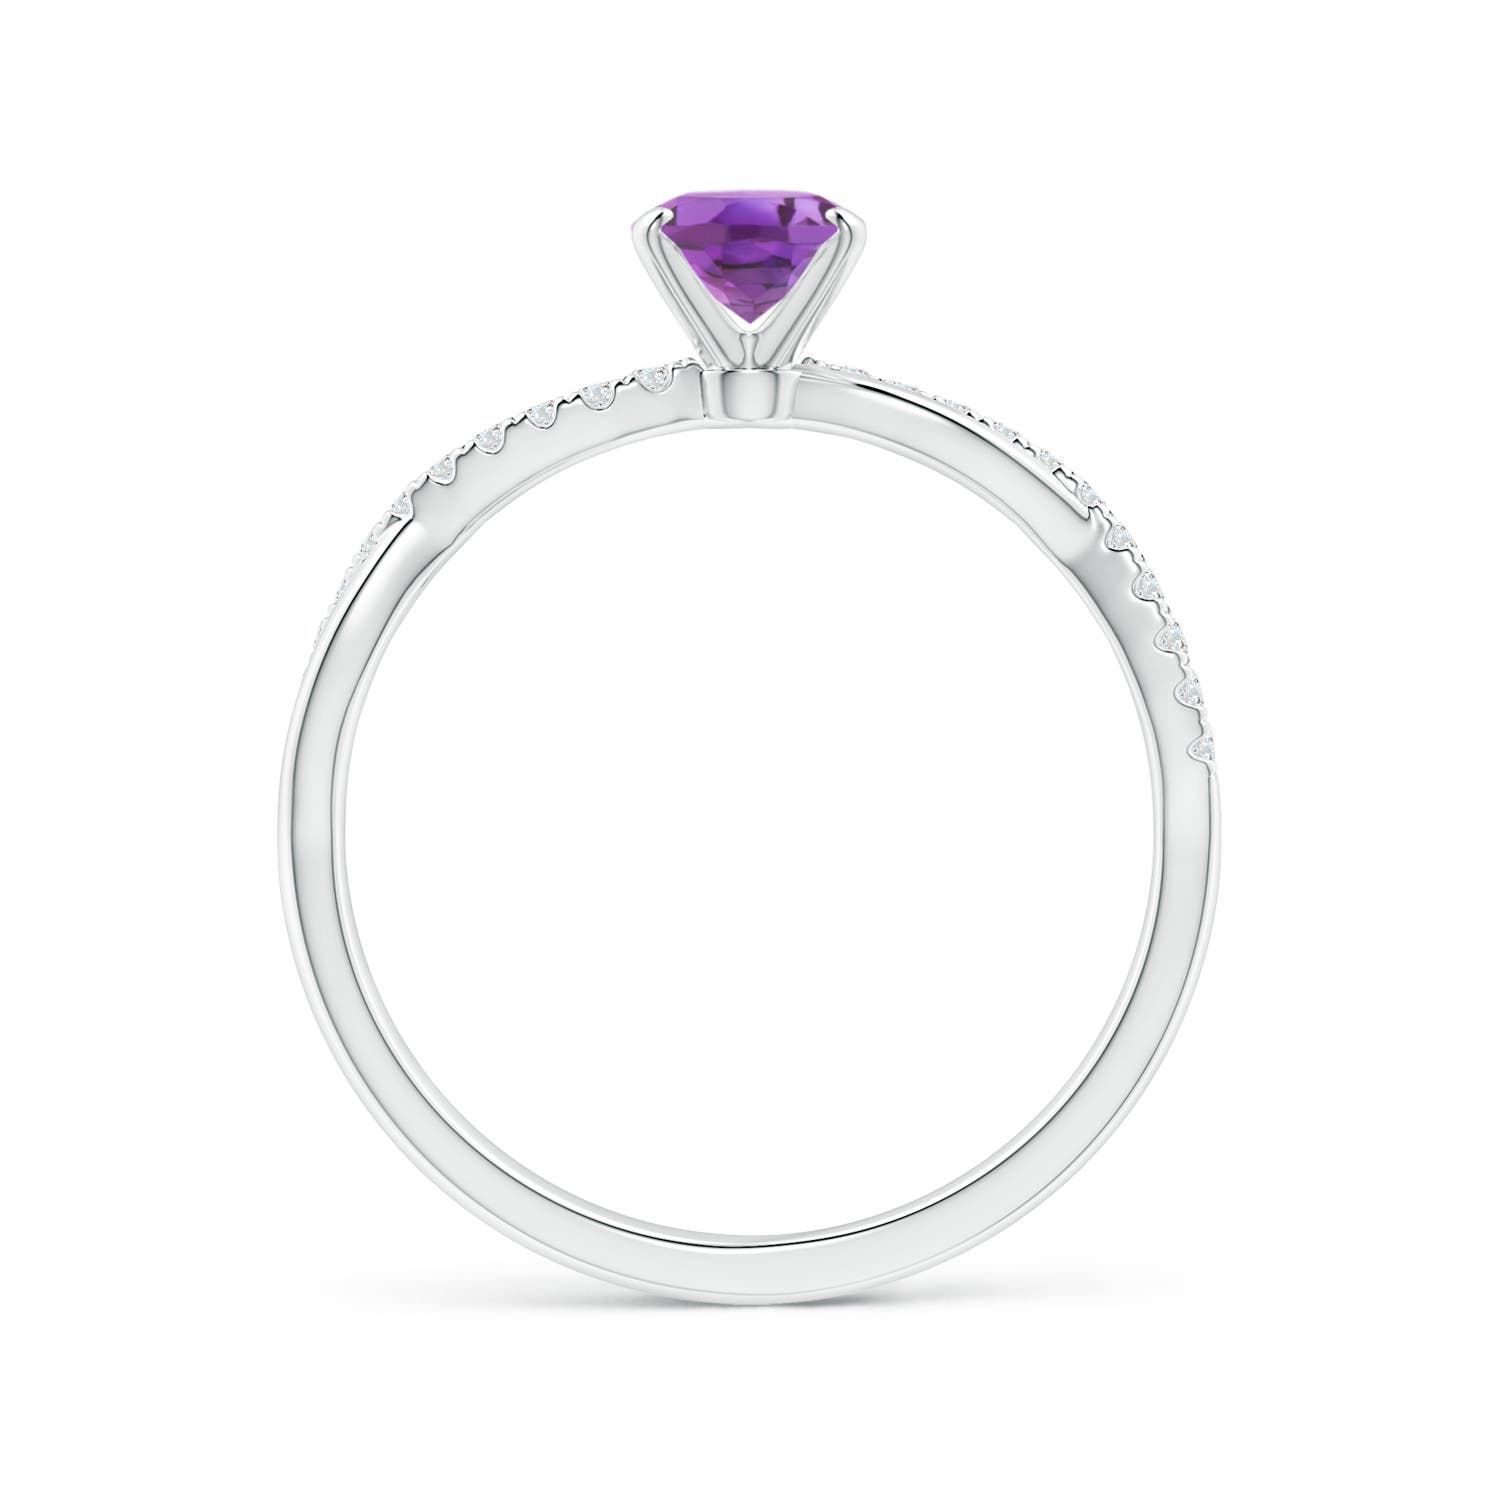 A - Amethyst / 0.81 CT / 14 KT White Gold